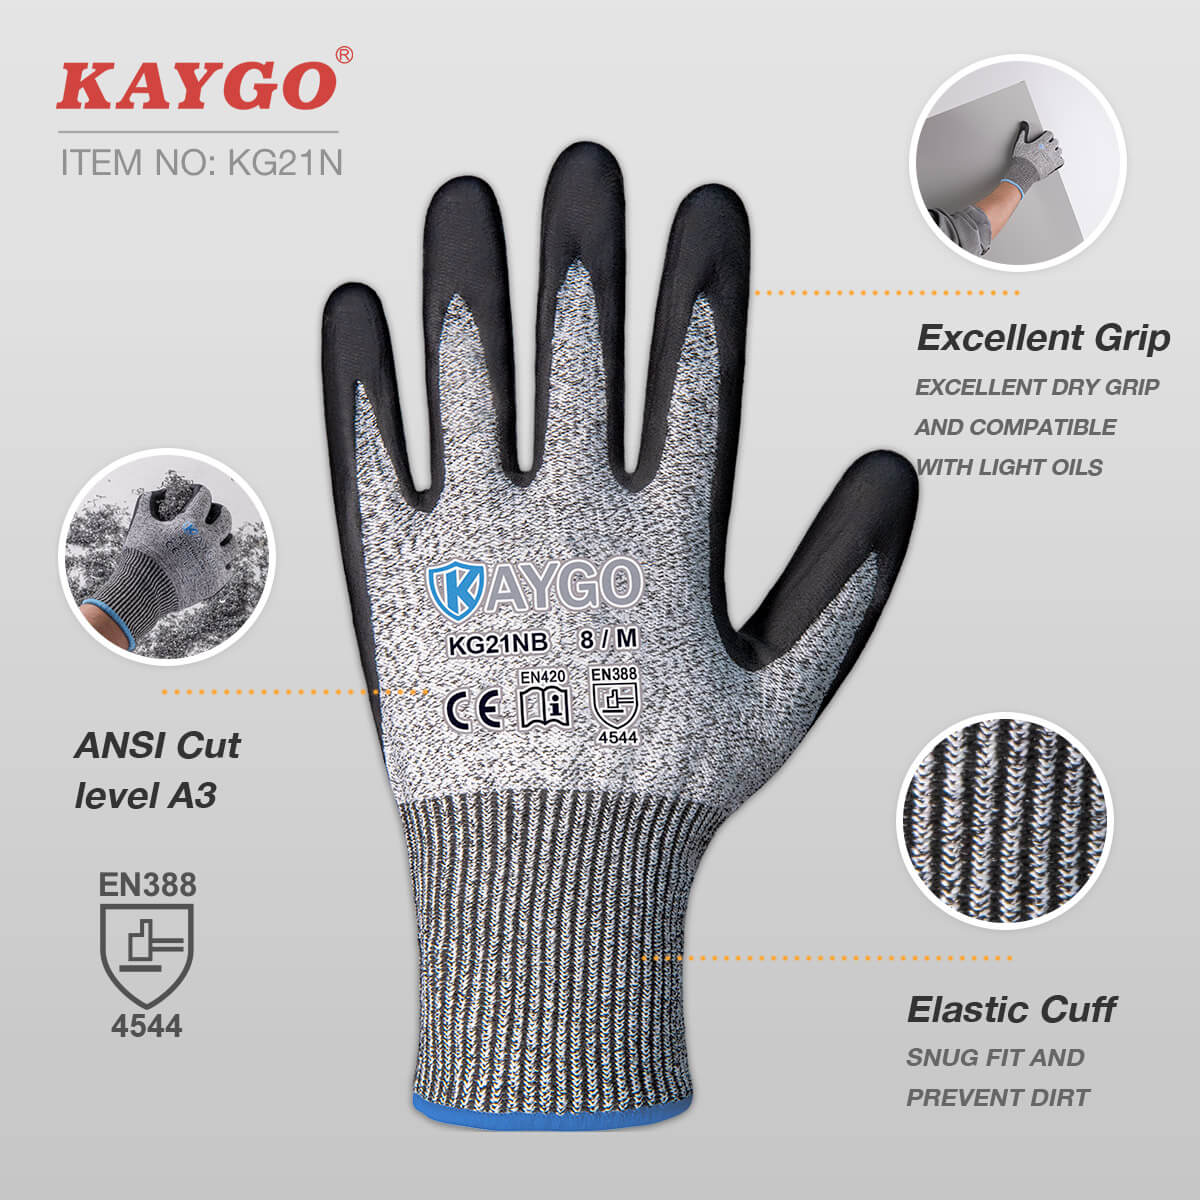 KAYGO Cut Resistant Gloves, Microfoam Nitrile Coated, ANSI Cut Level A3,Superior Grip Performance,Durable, Safety Work Gloves for Men